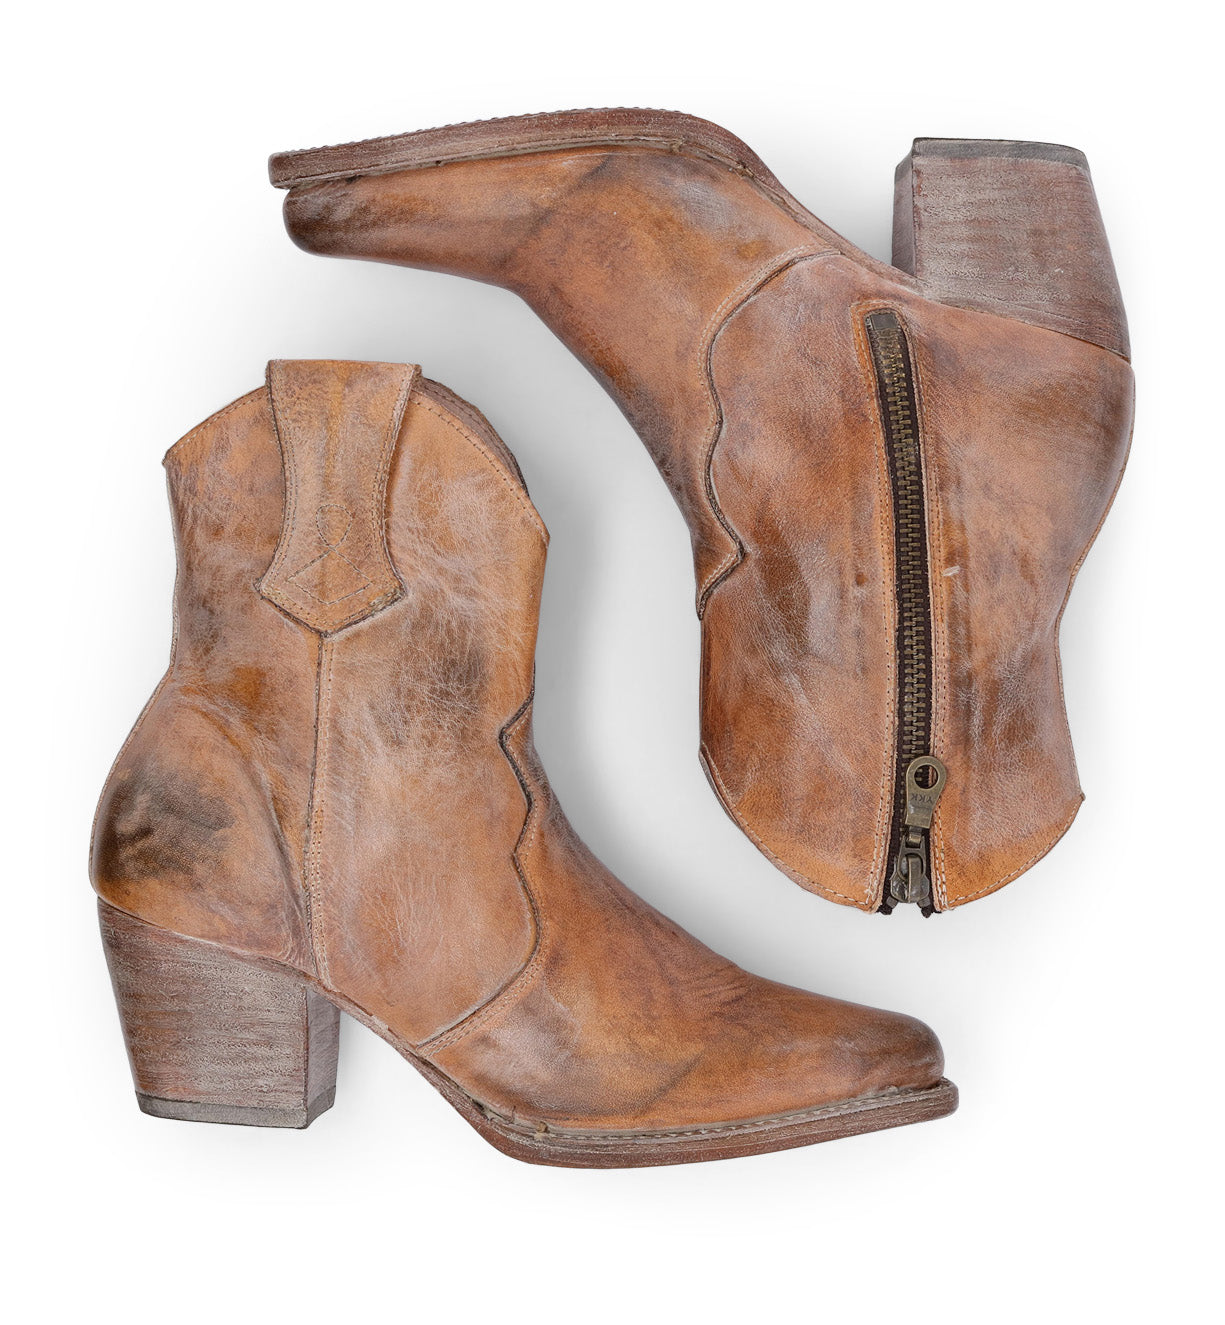 A pair of Baila cowboy boots by Oak Tree Farms on a white background.